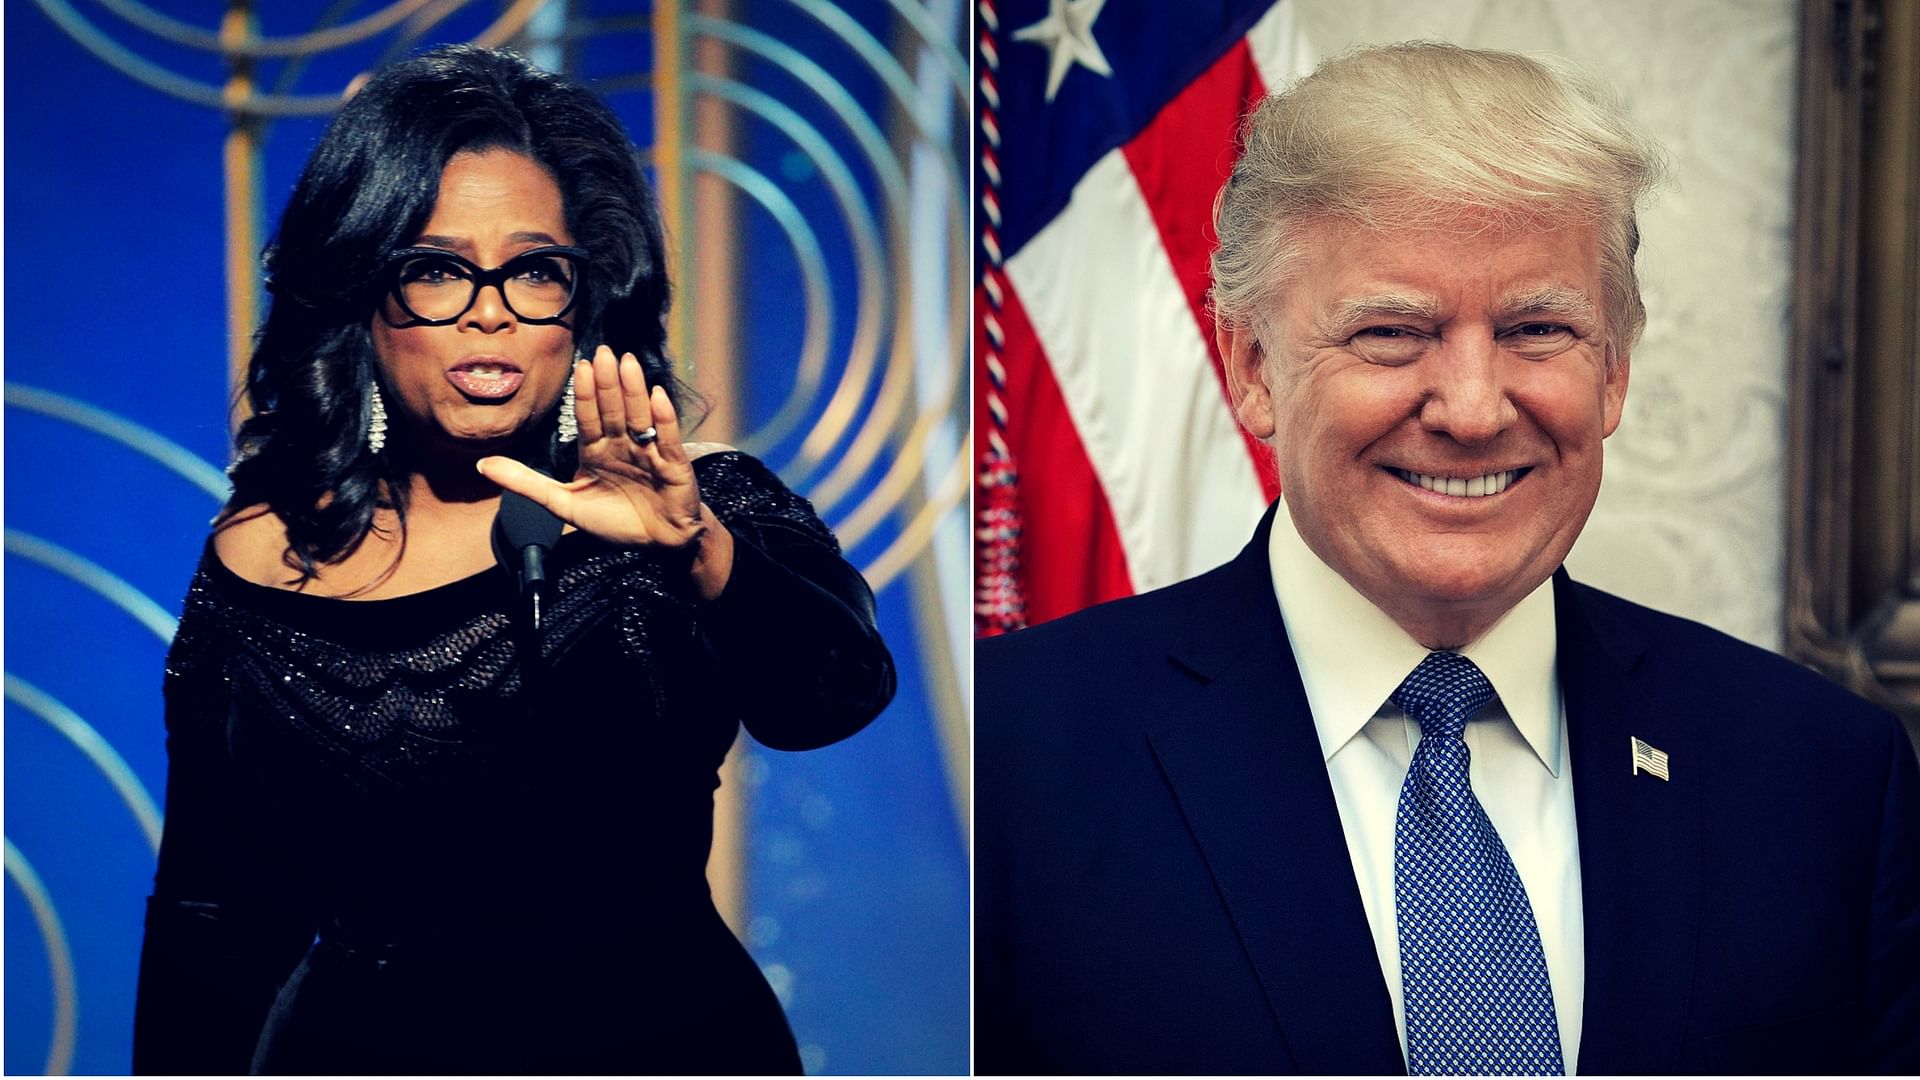 Trump says he will beat Oprah if she runs for President.